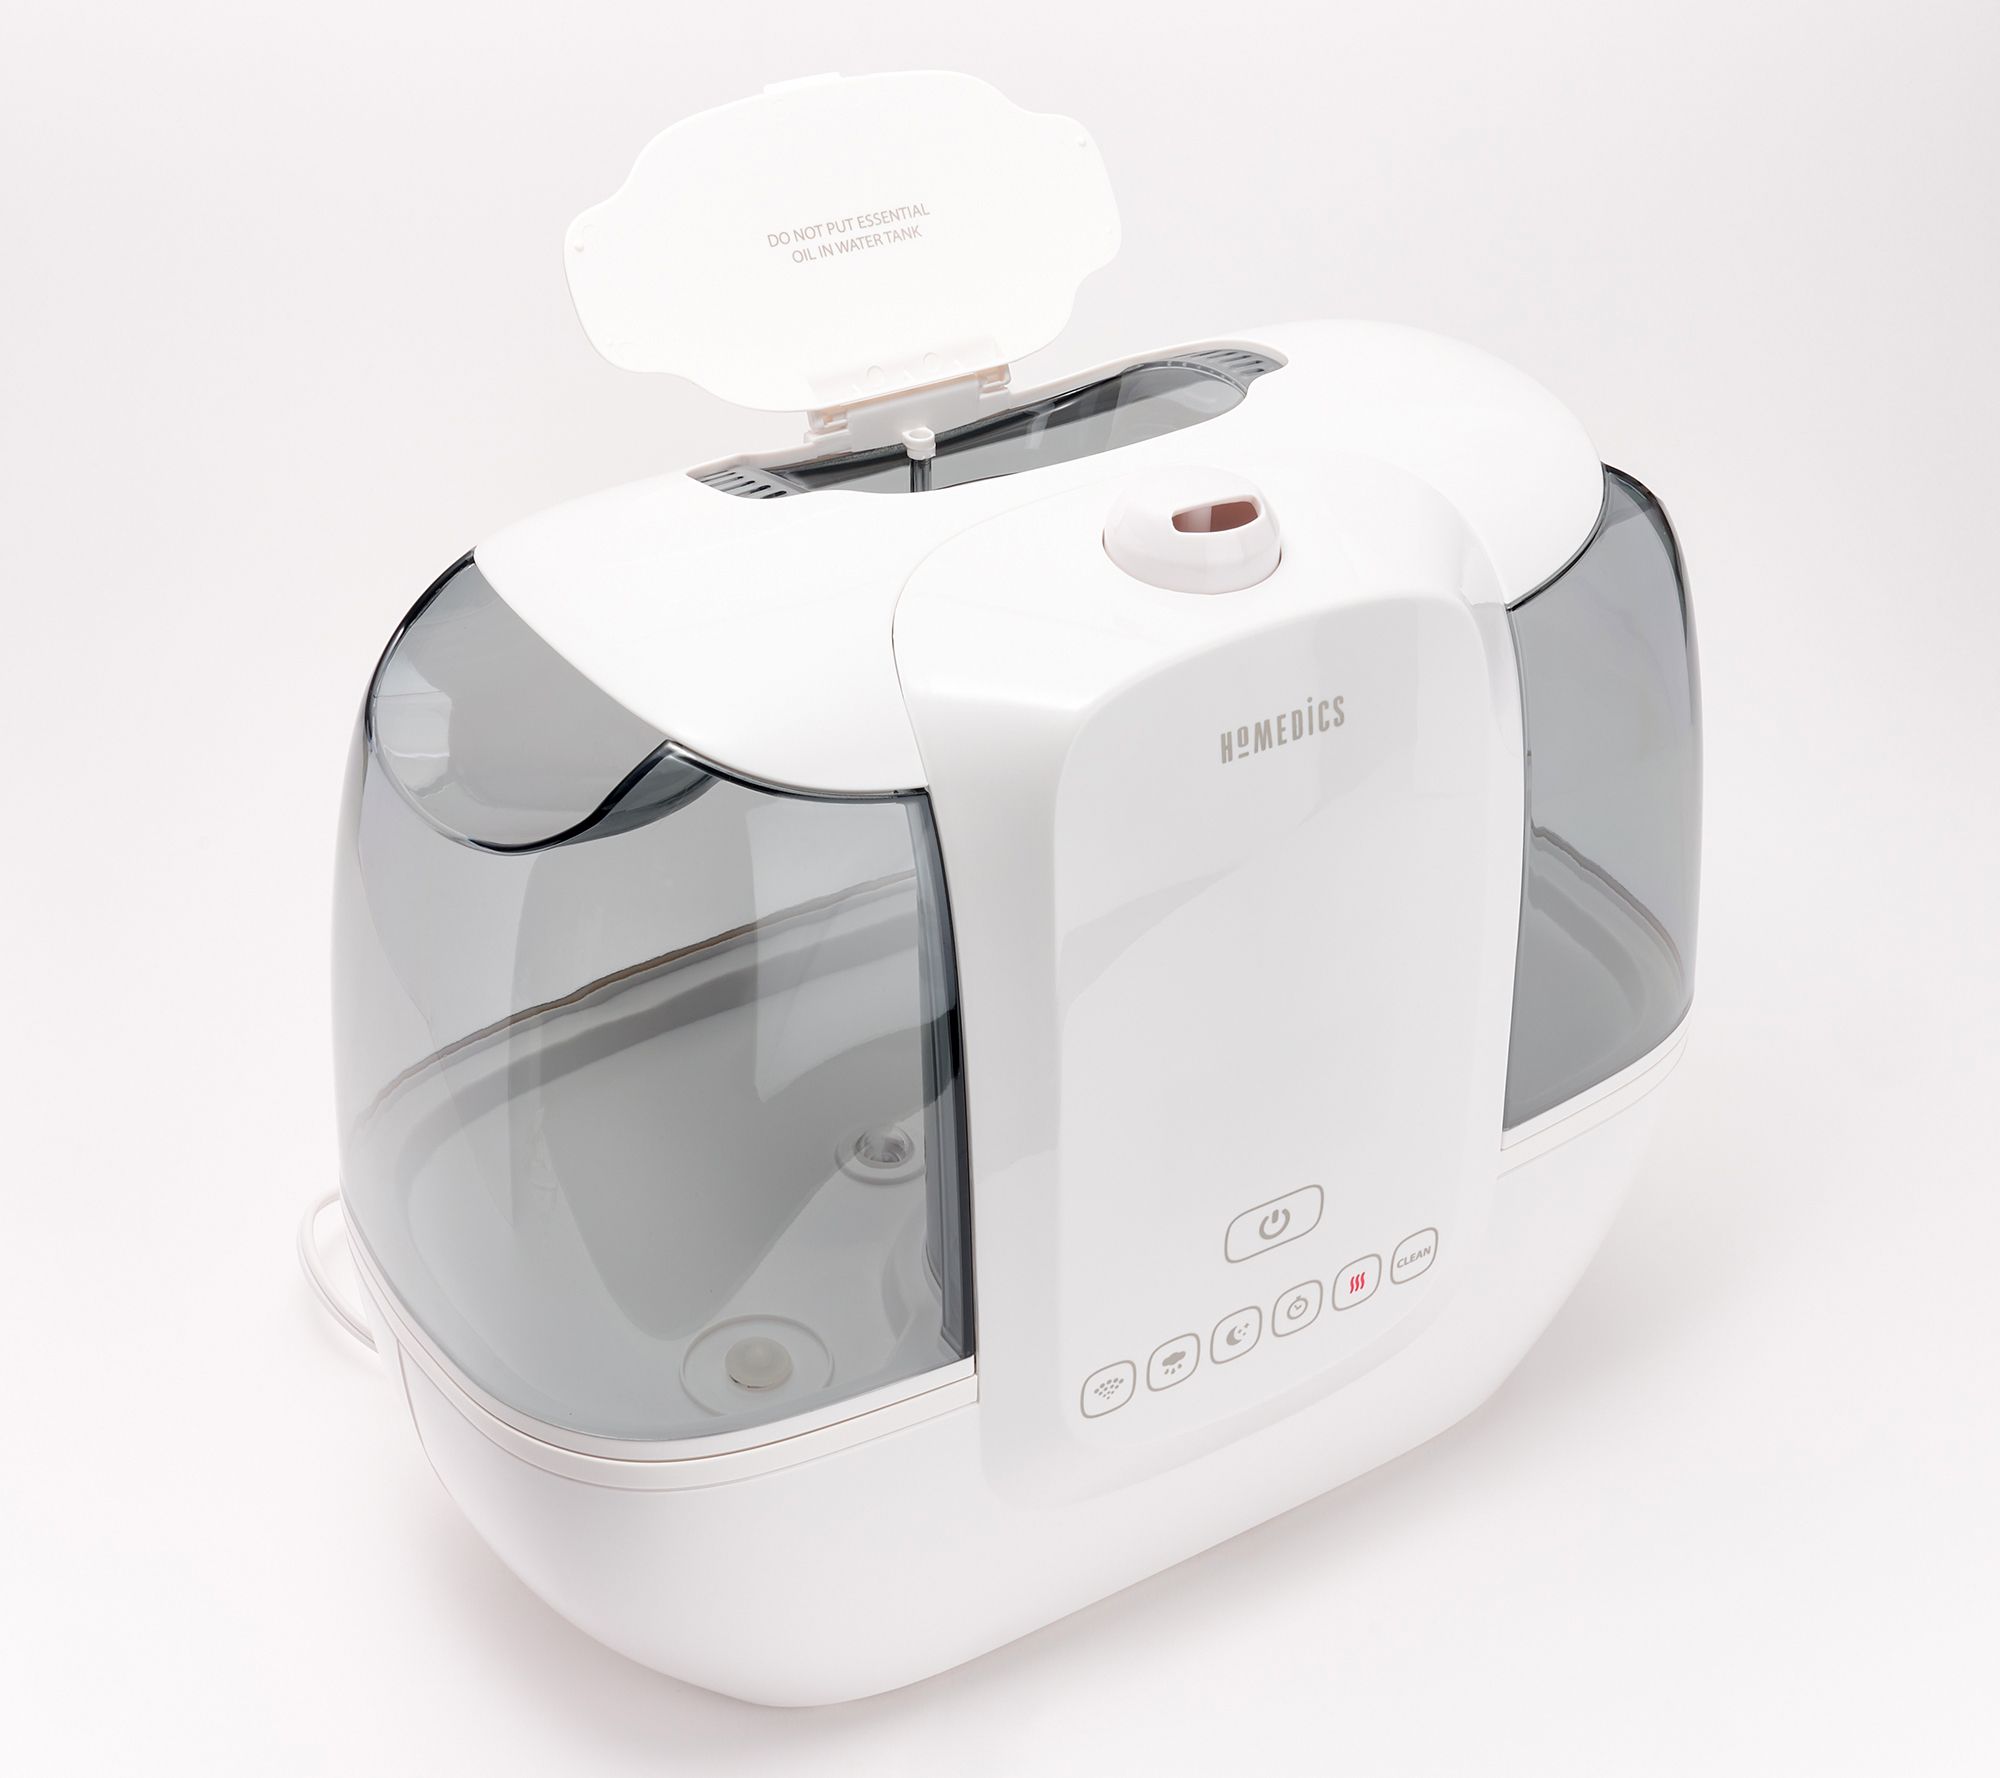 What's the Difference? Diffuser vs Humidifer - Homedics Blog